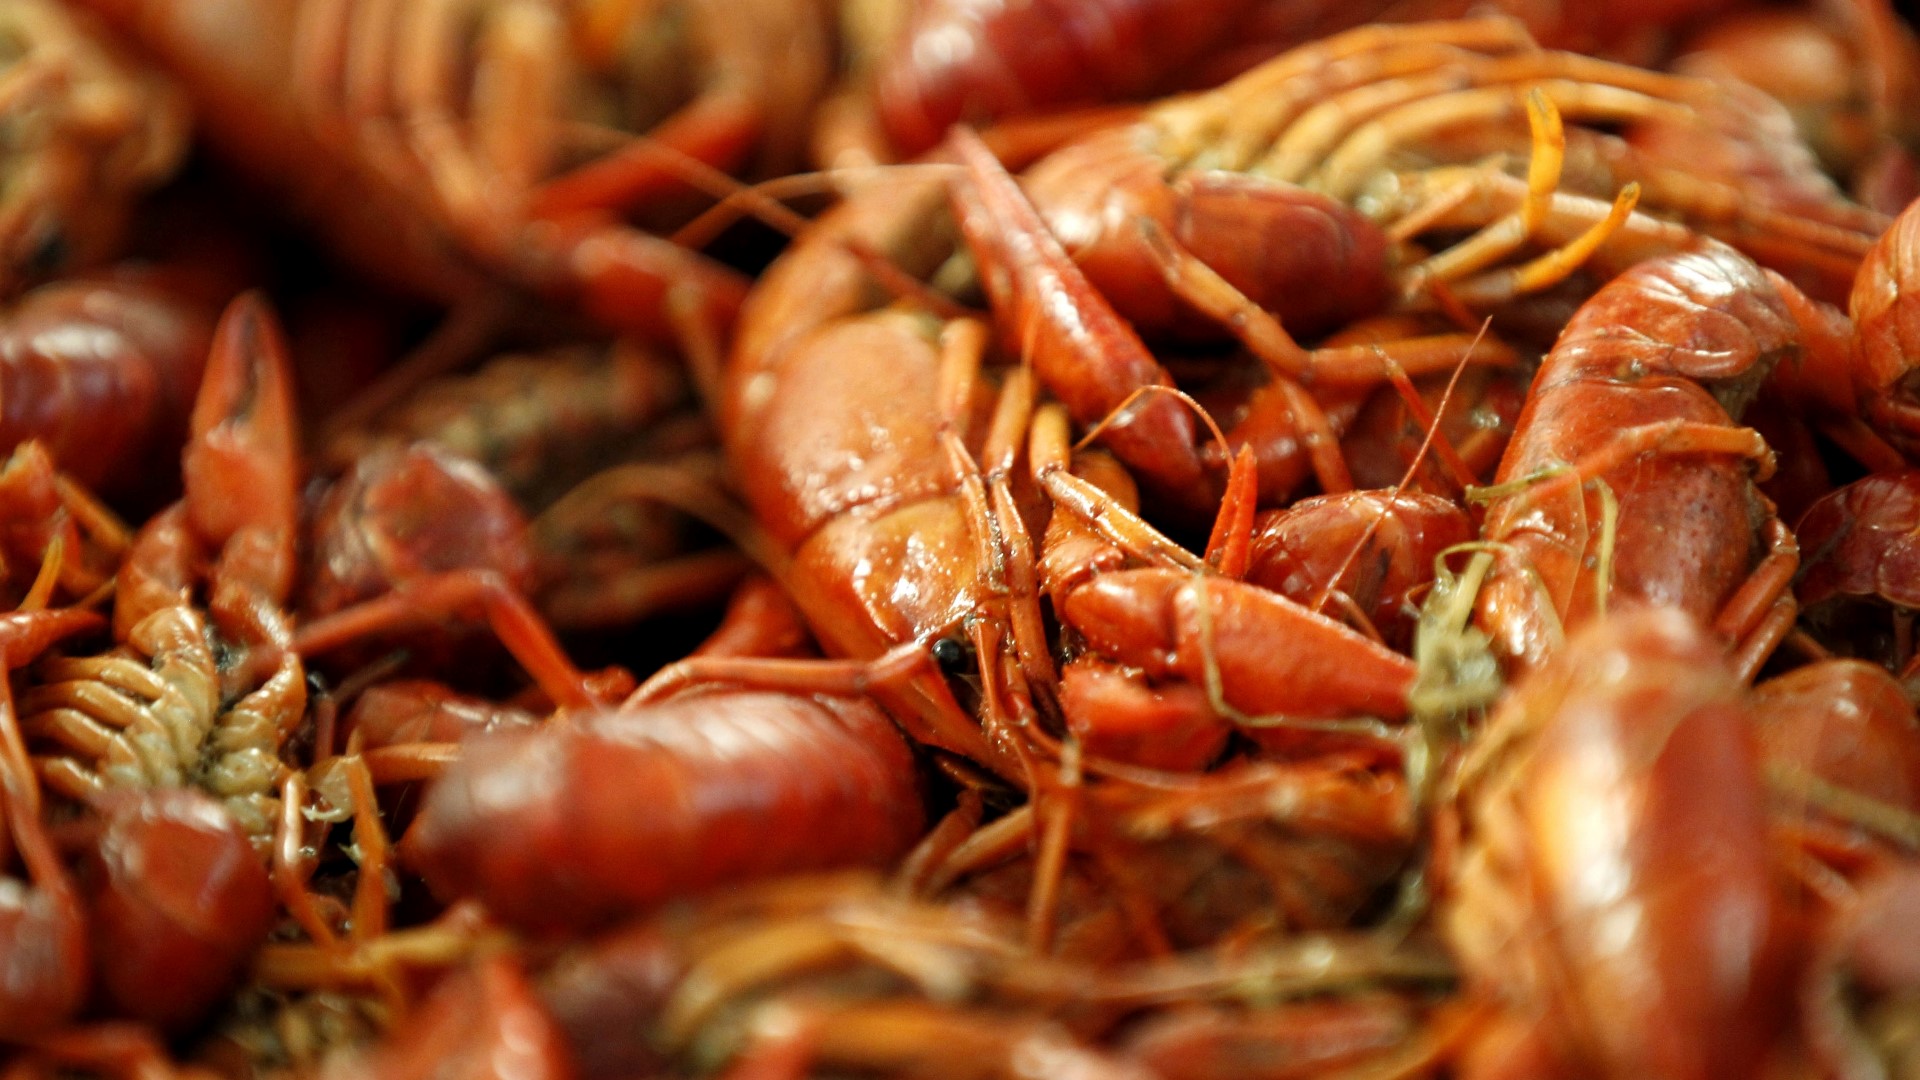 Local shops and restaurants are seeing the crawfish supply go up after a tough– and expensive– start to the season. They still have a lot of catching up to do.